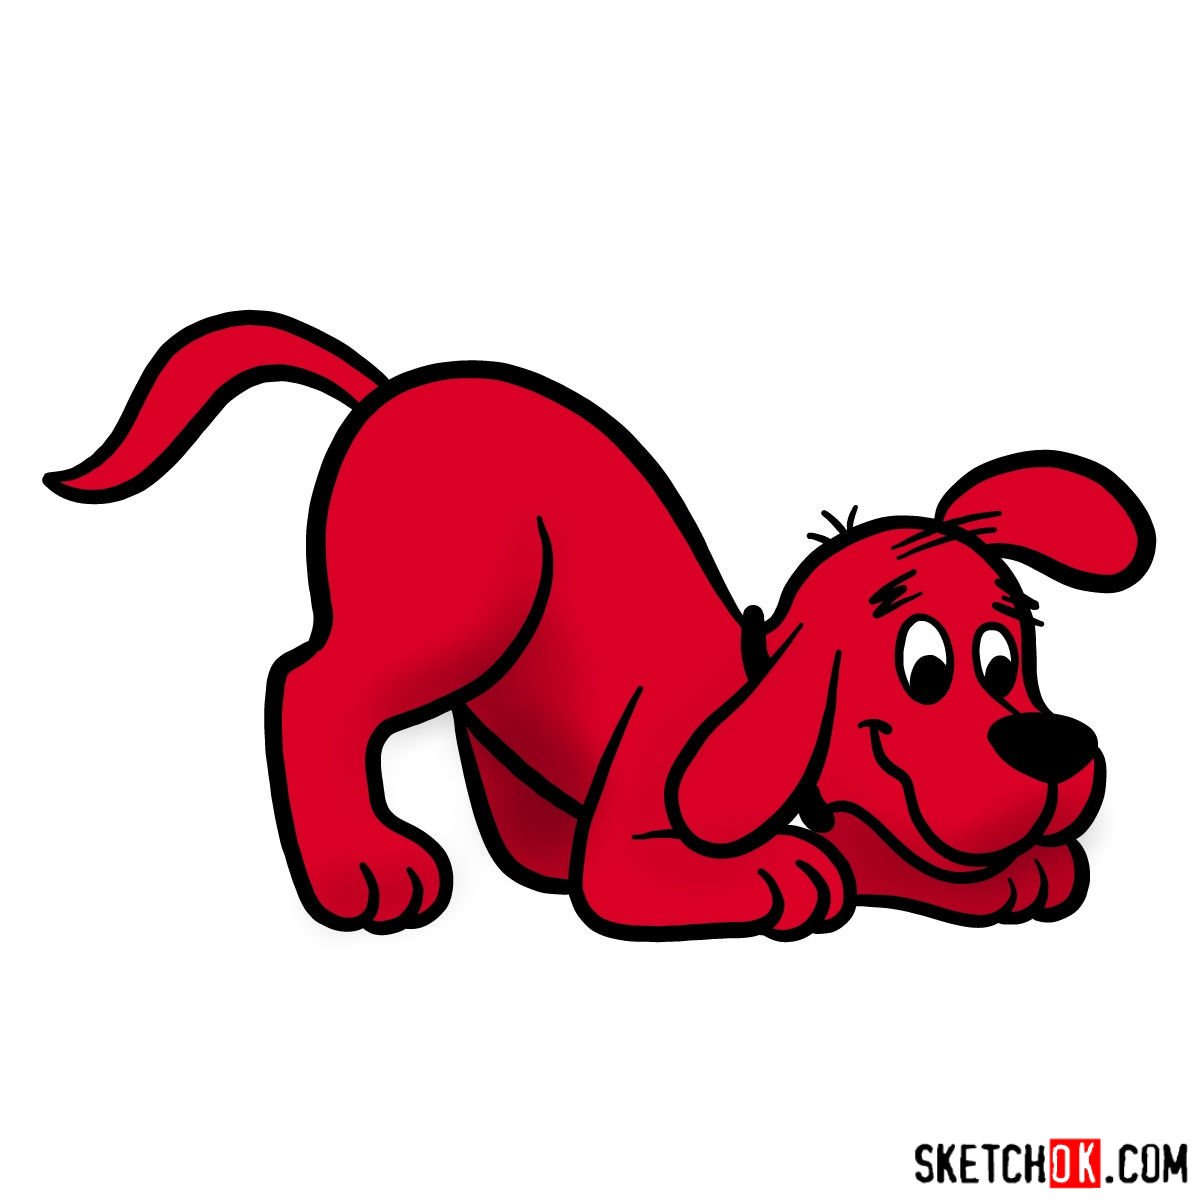 How to draw Clifford the Big Red Dog Sketchok easy